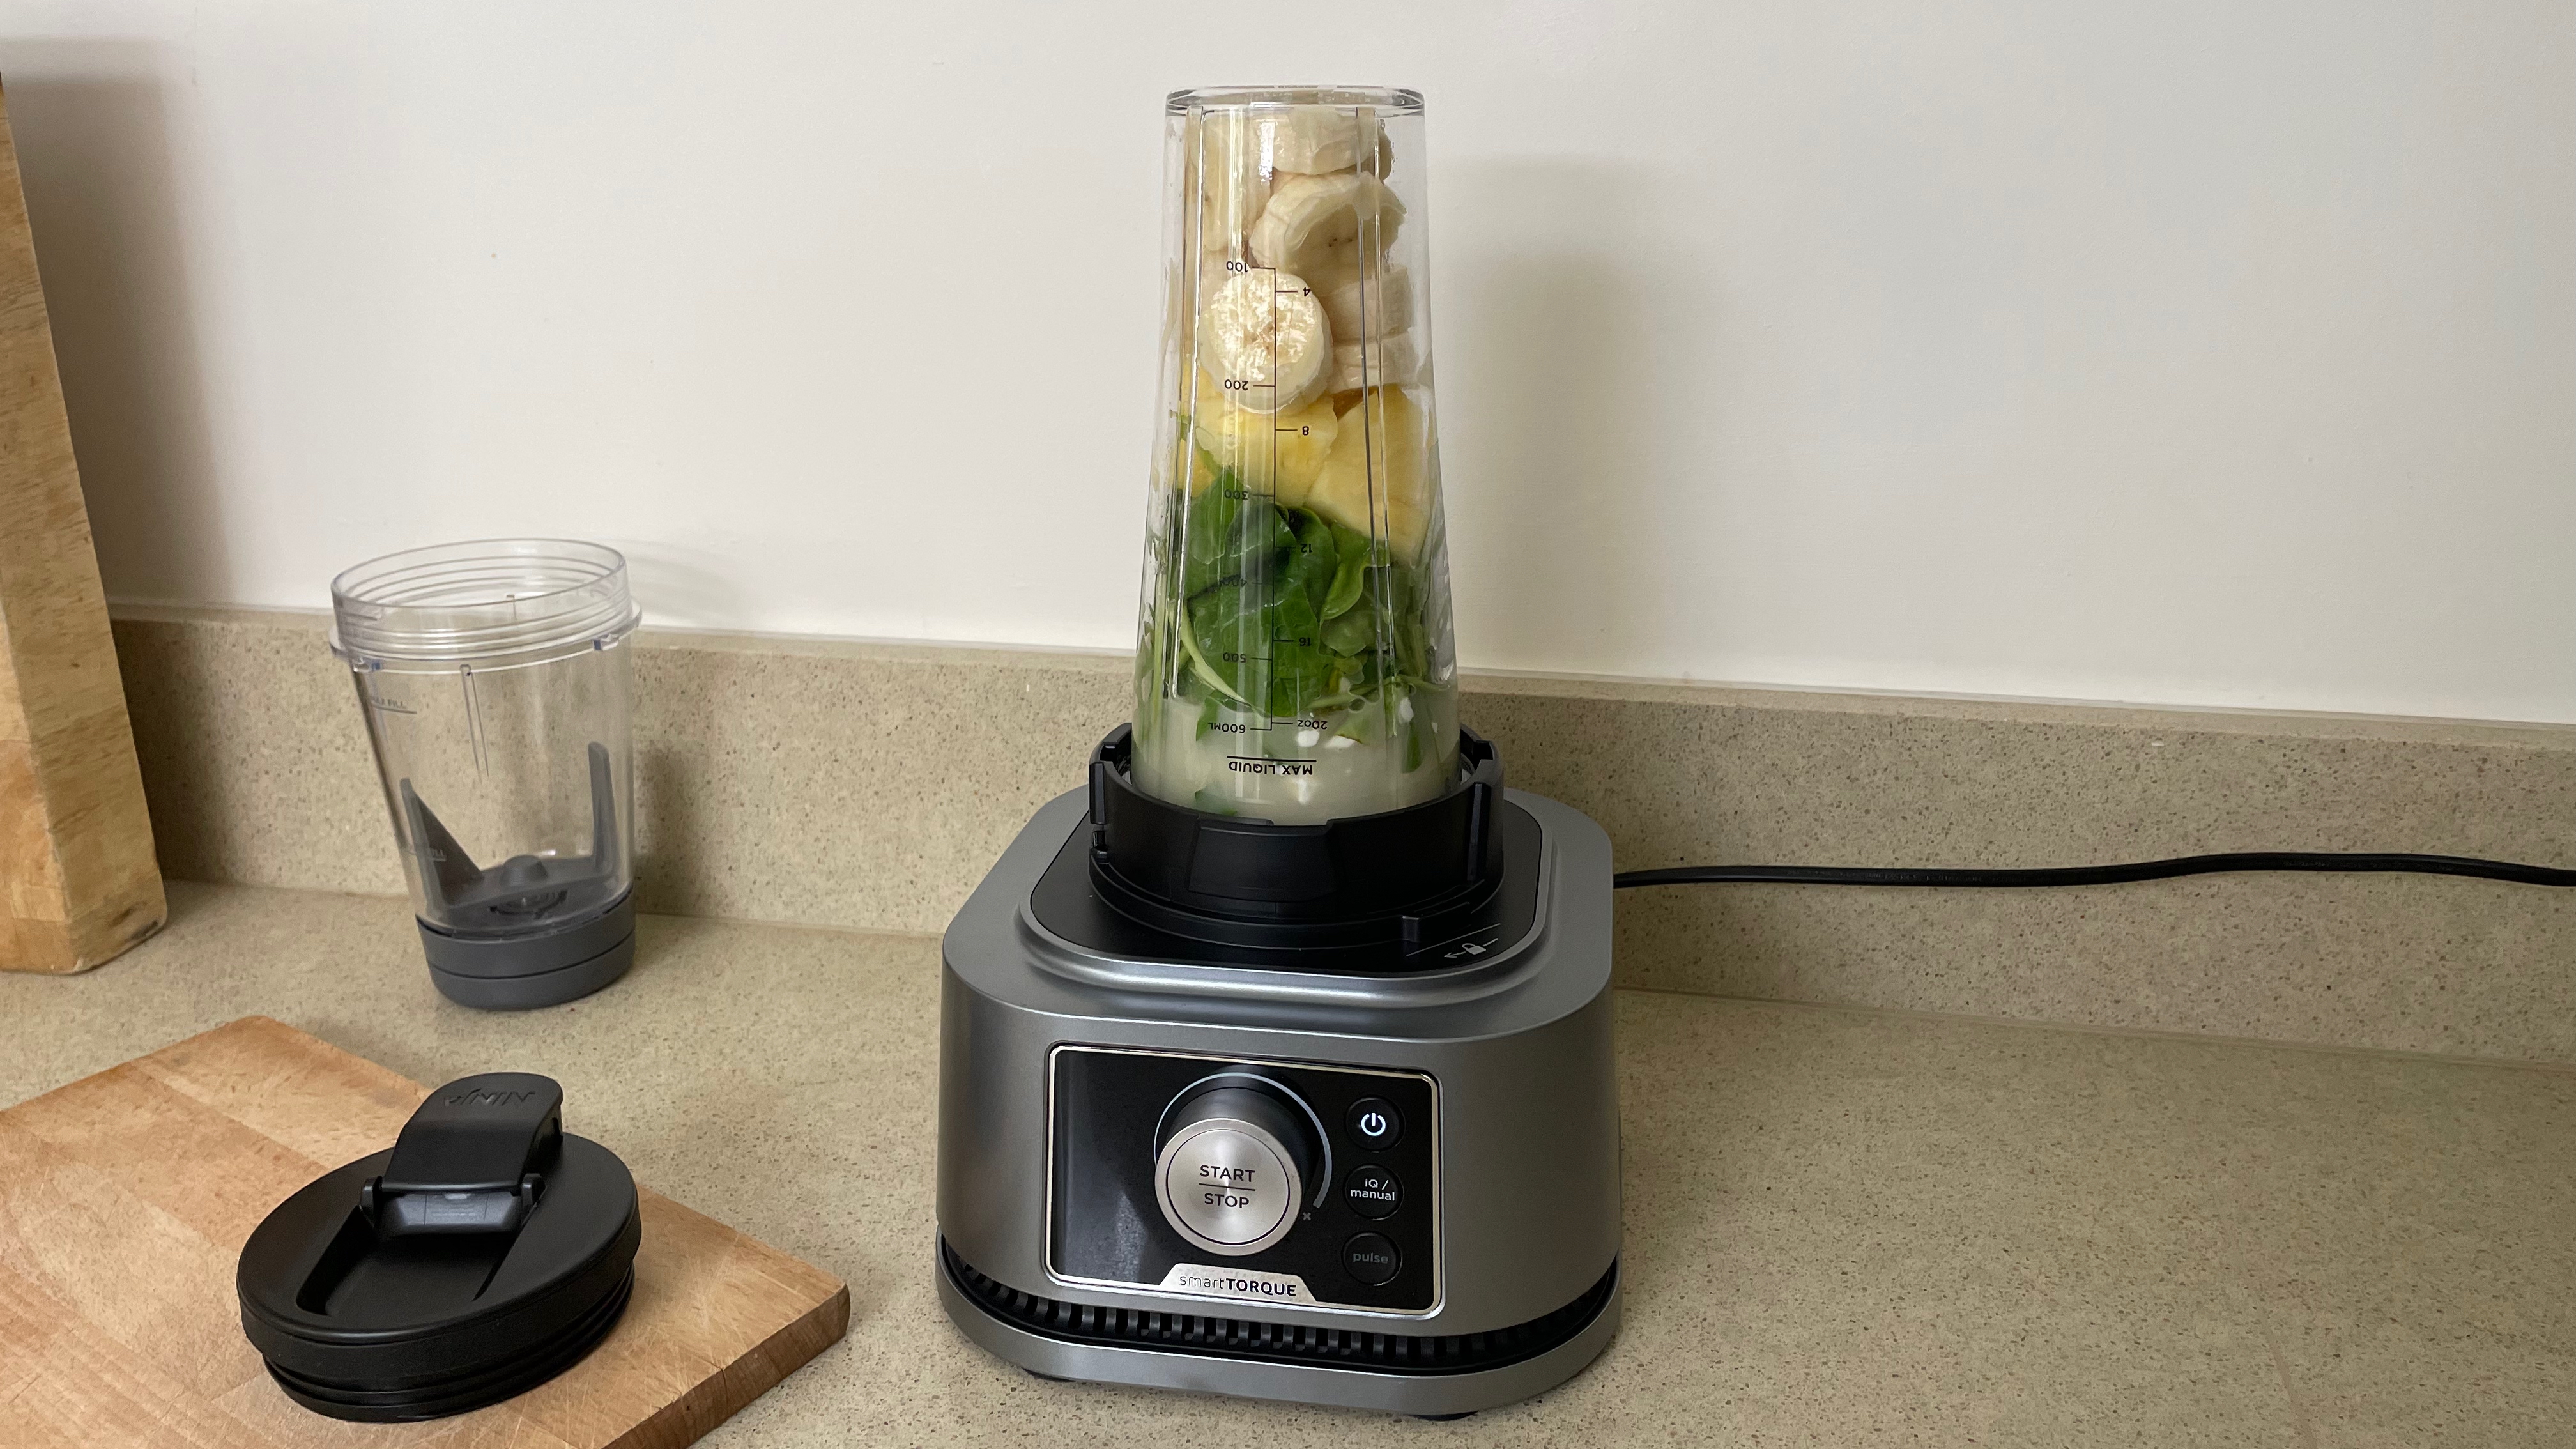 Ninja Foodi Power Blender & Processor System with banana and spinach ingredients inside